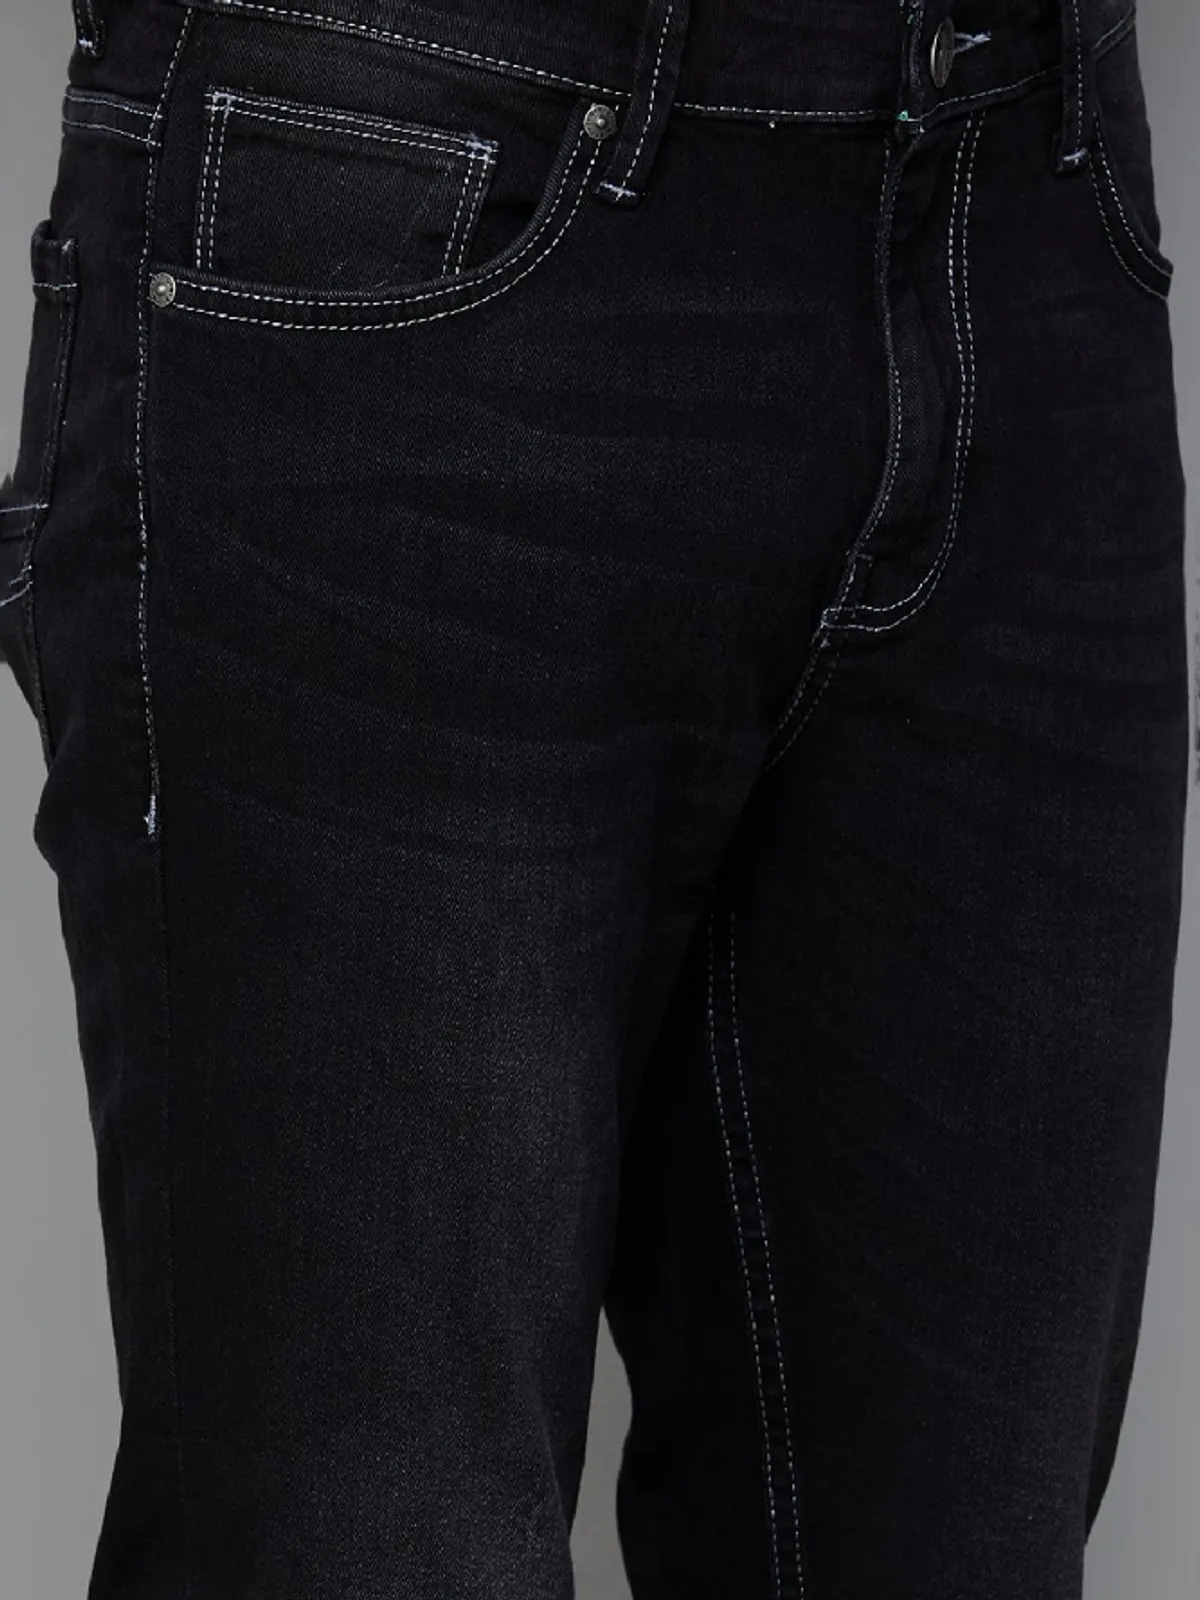 UCB black washed skinny fit jeans